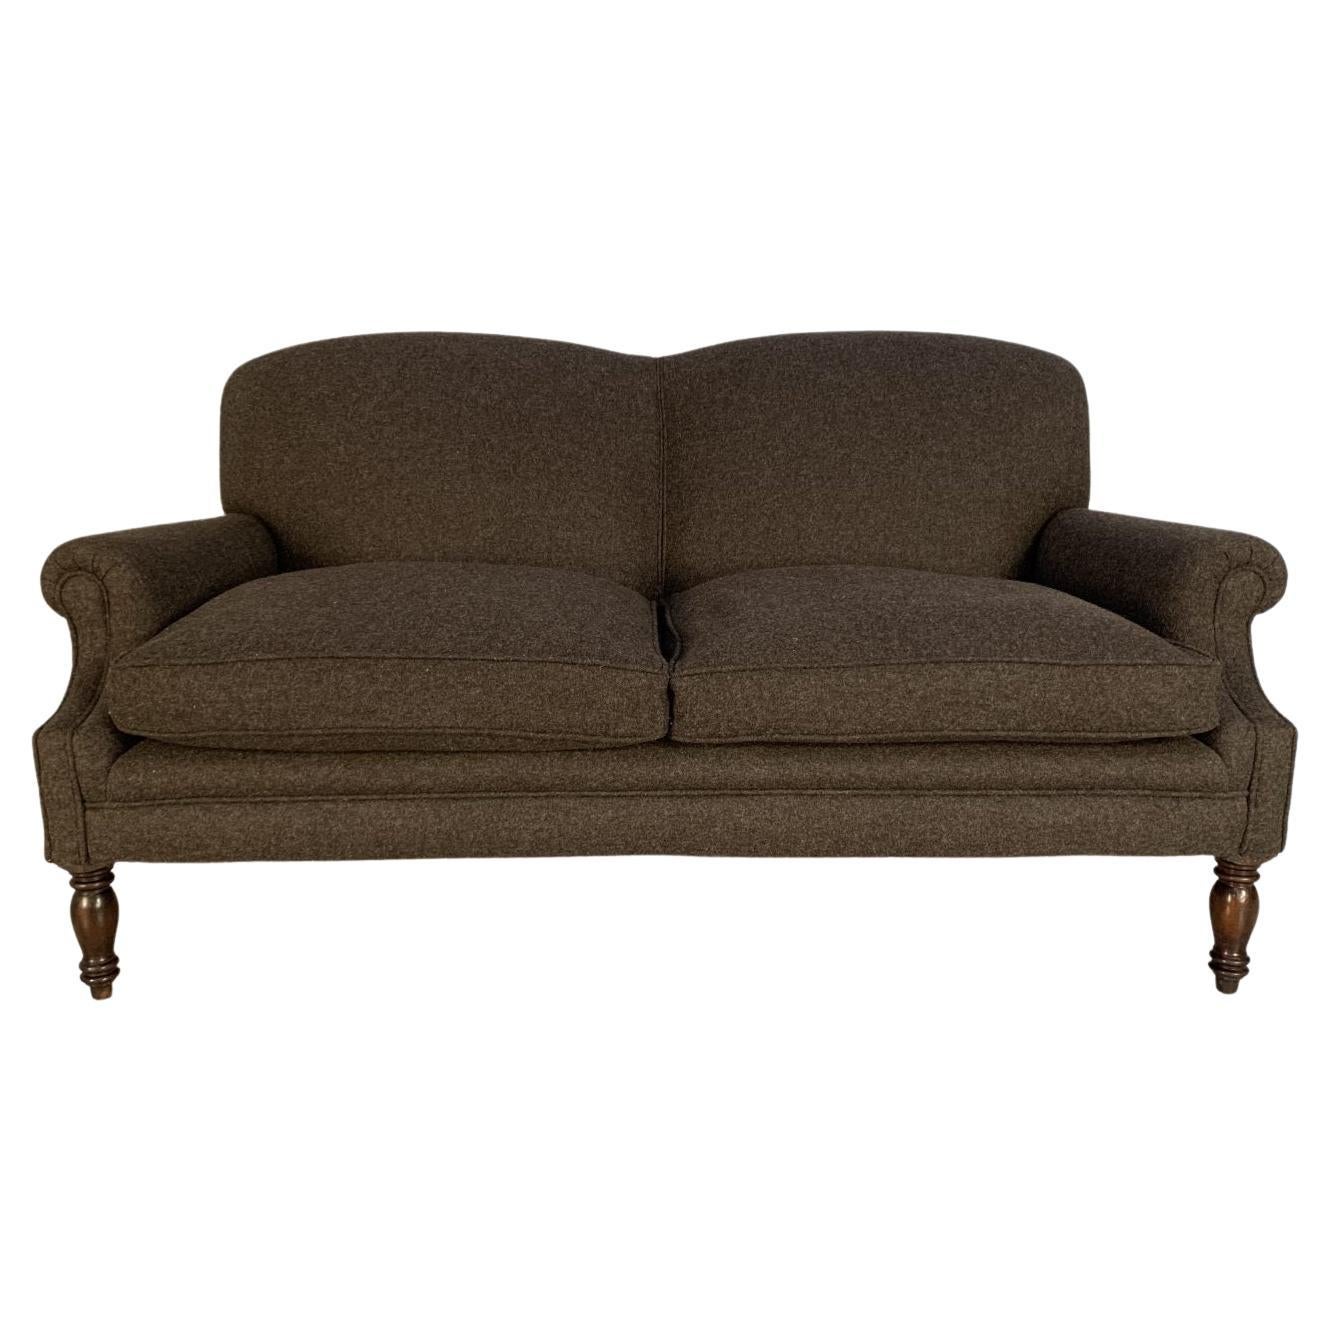 George Smith “Dahl” Sofa, in Abraham Moon Wool For Sale